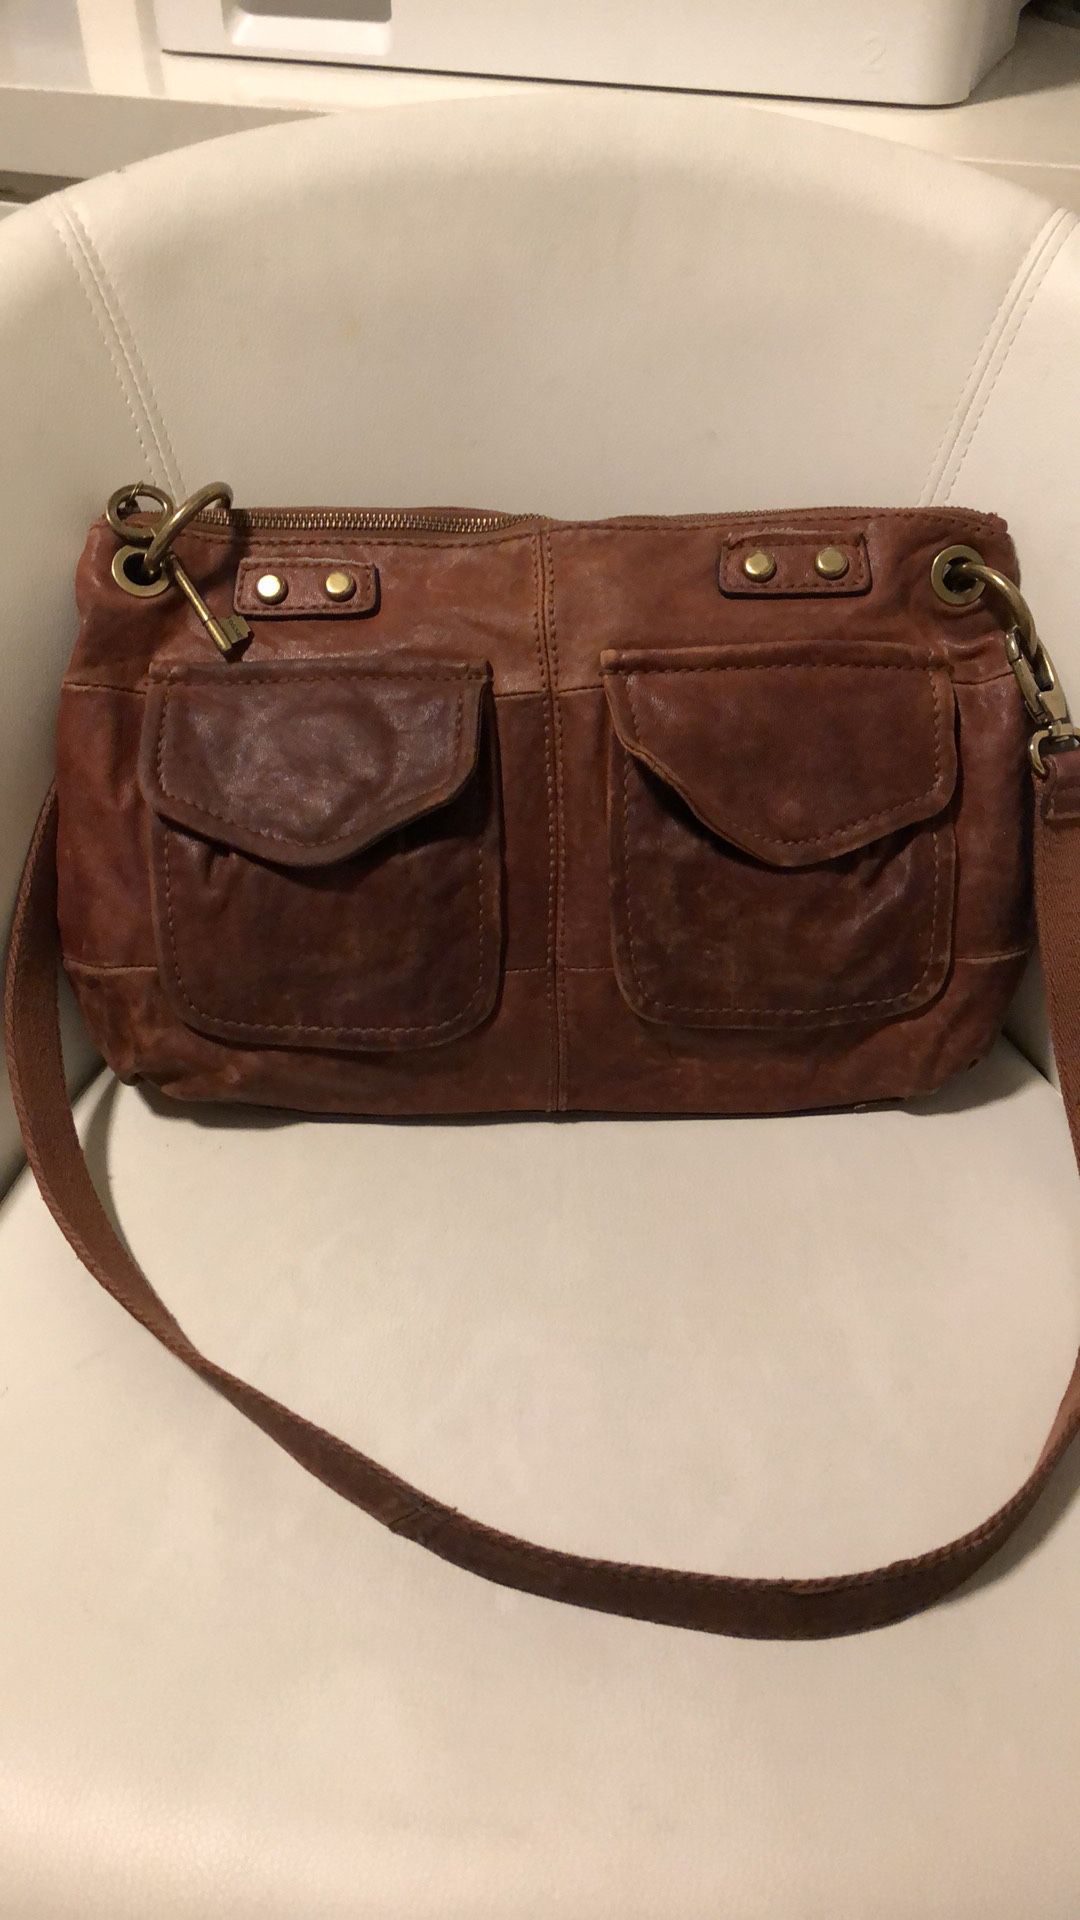 Fossil distressed leather crossbody bag